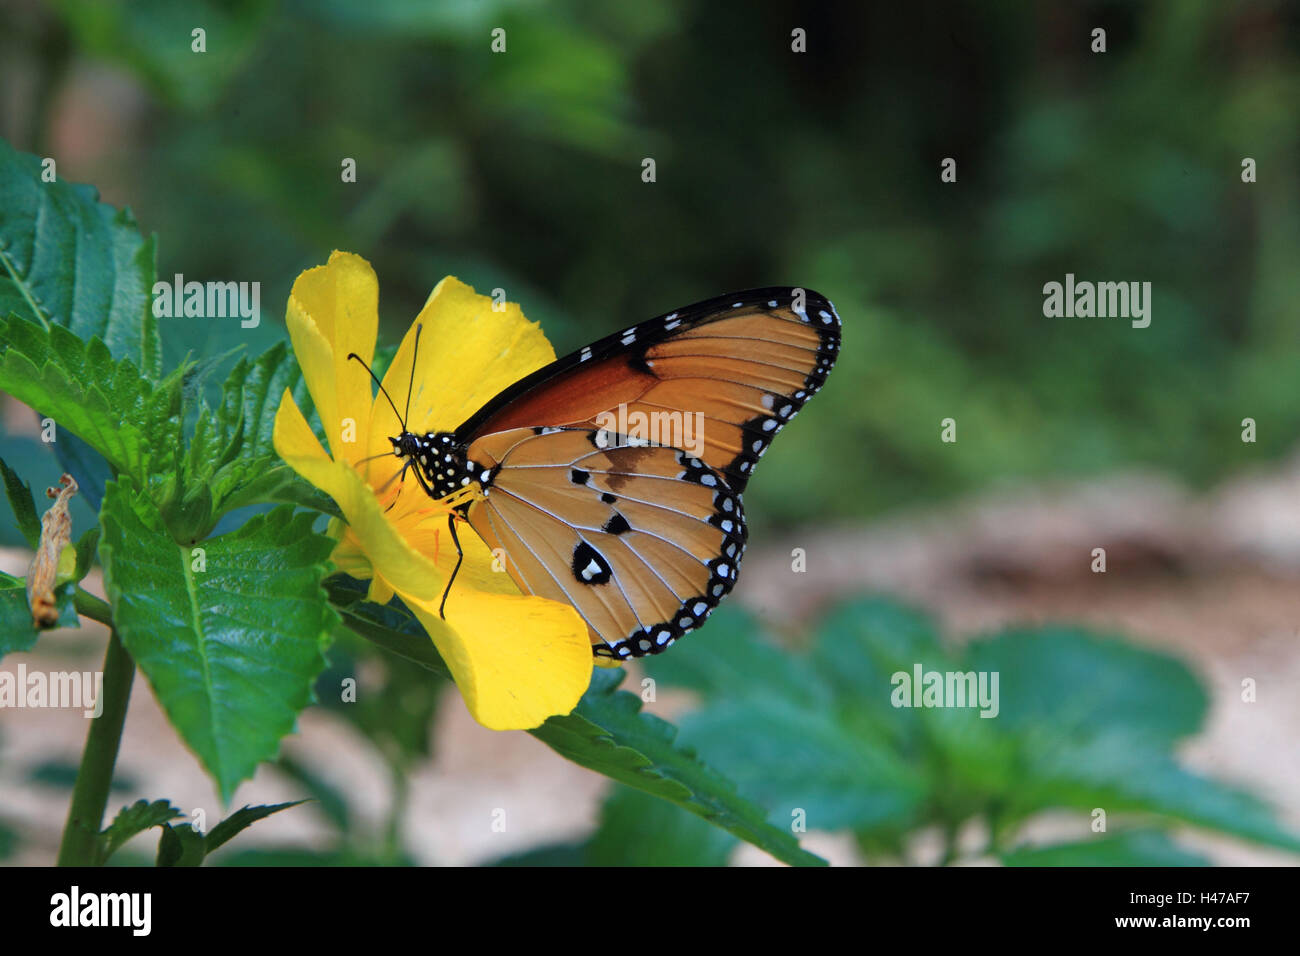 Butterfly, African monarch, blossom, Stock Photo